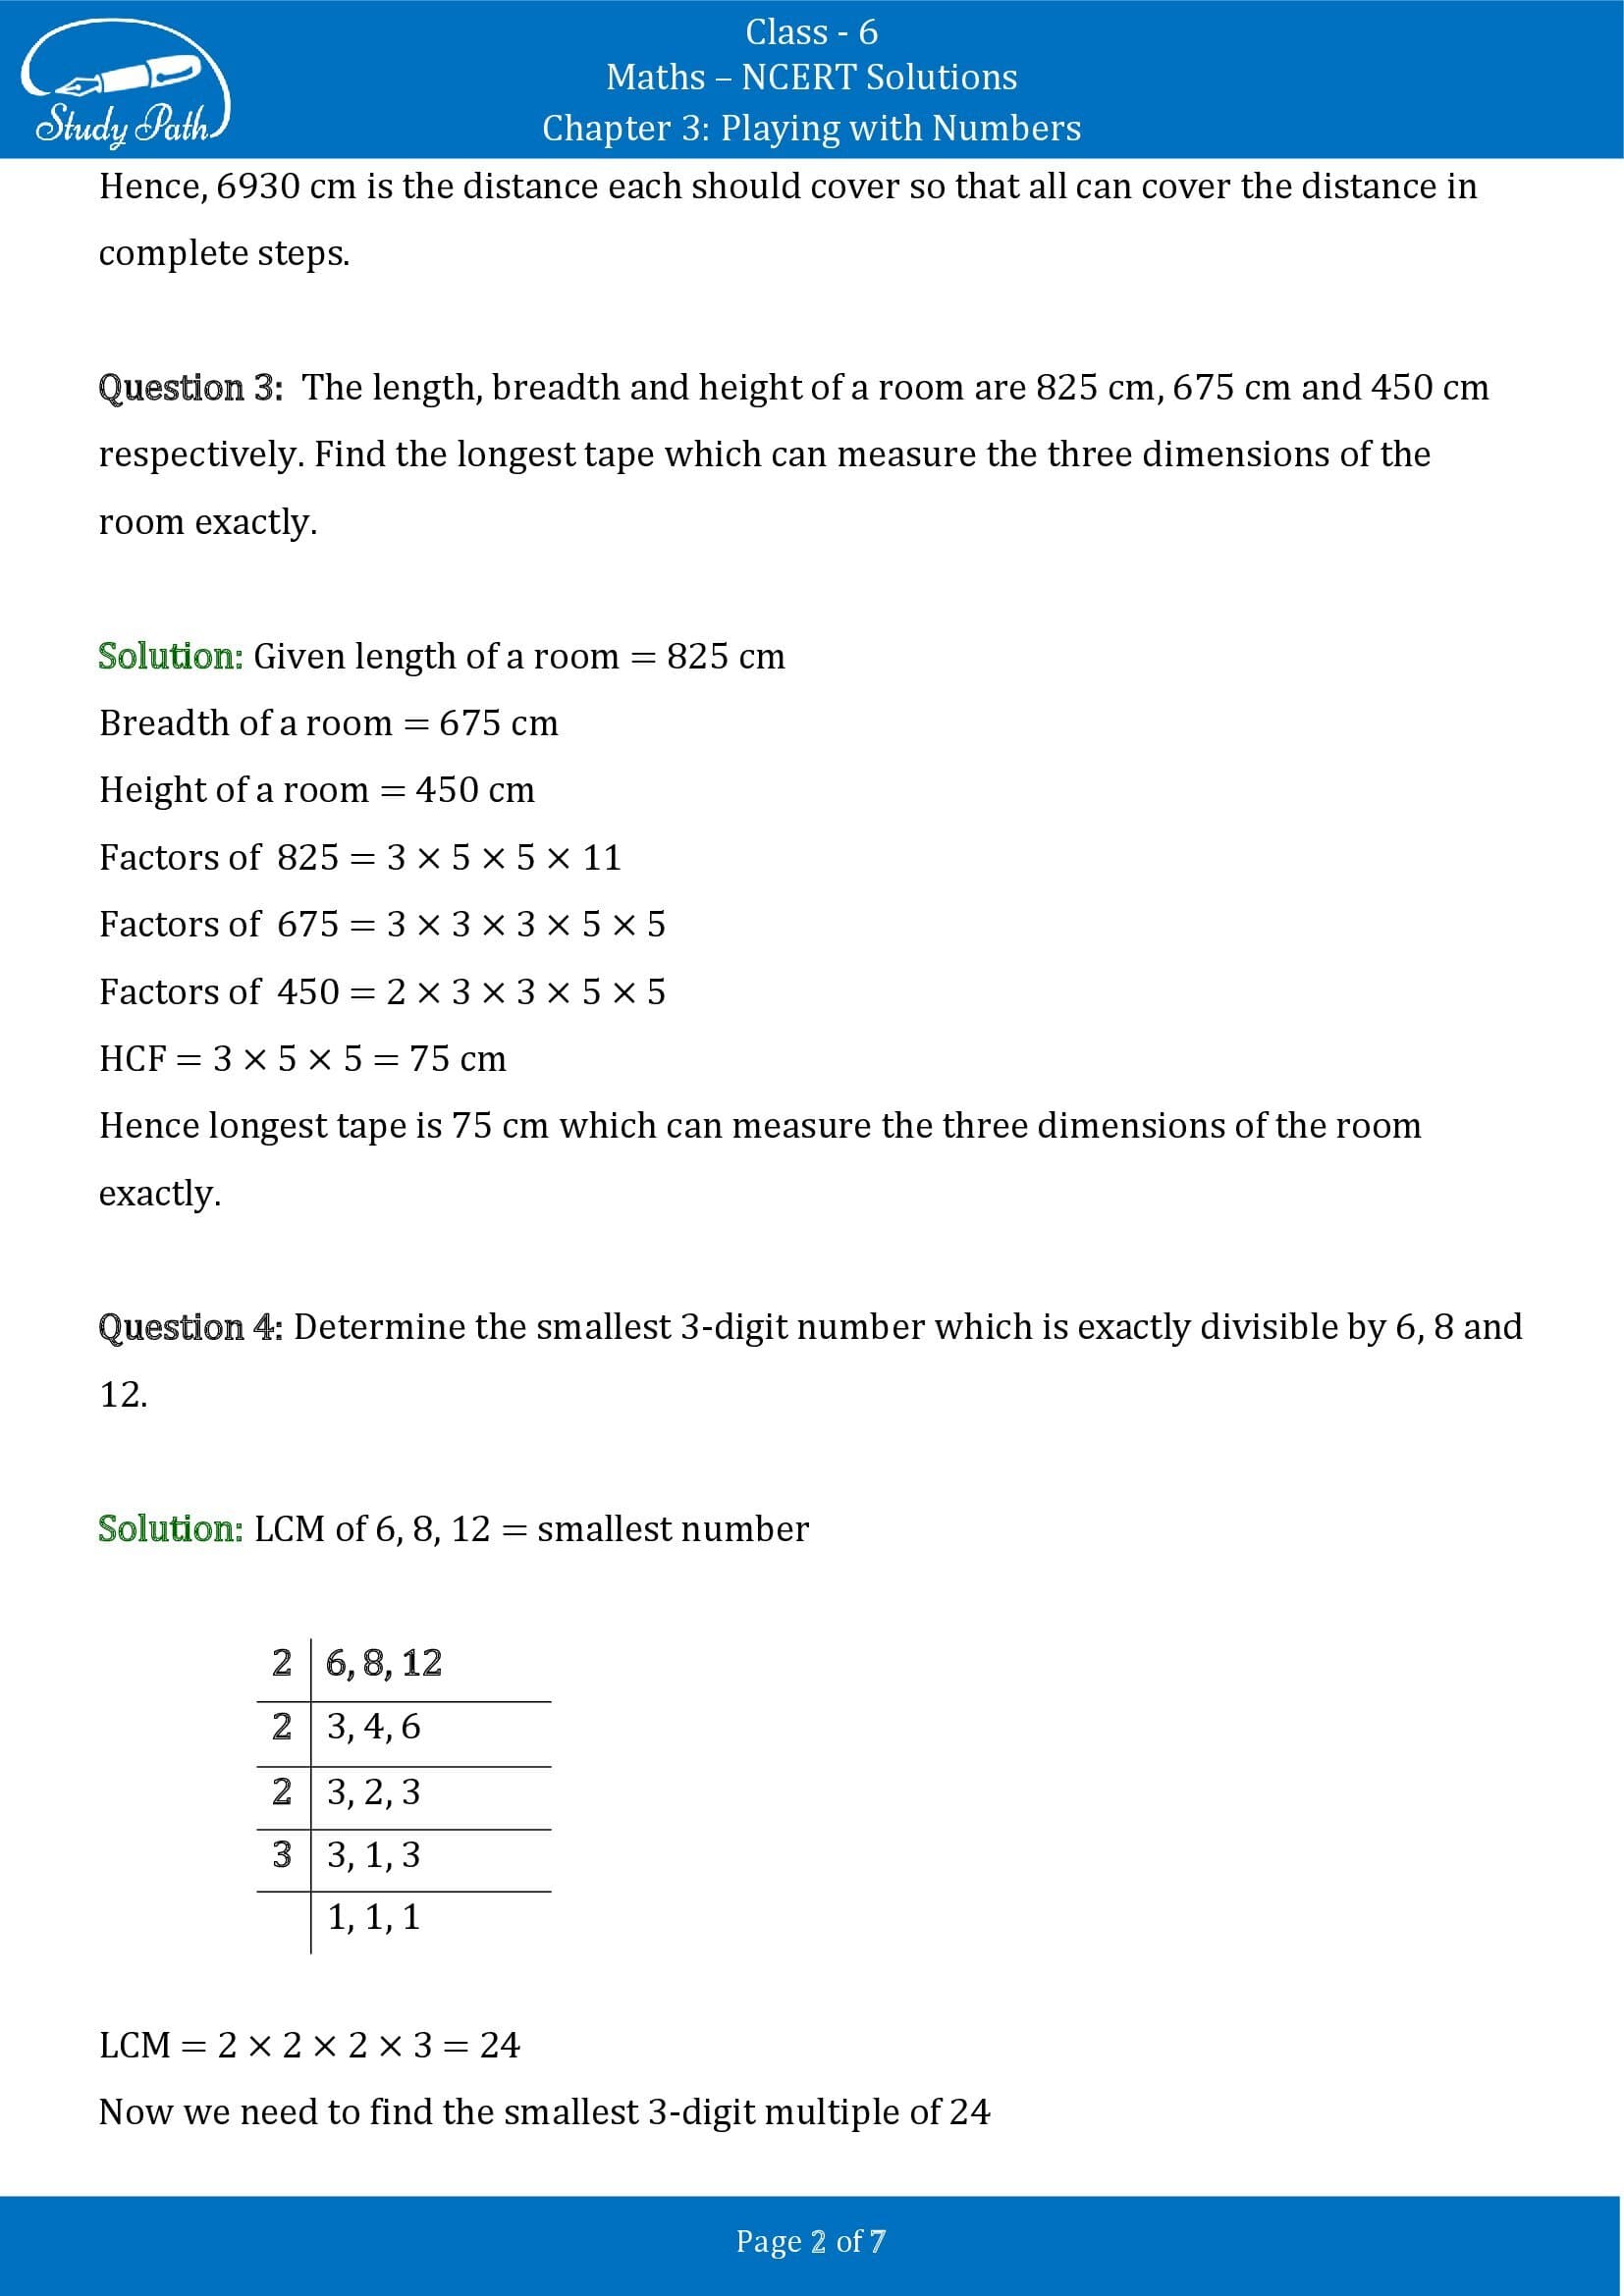 NCERT Solutions for Class 6 Maths Chapter 3 Playing with Numbers Exercise 3.7 00002